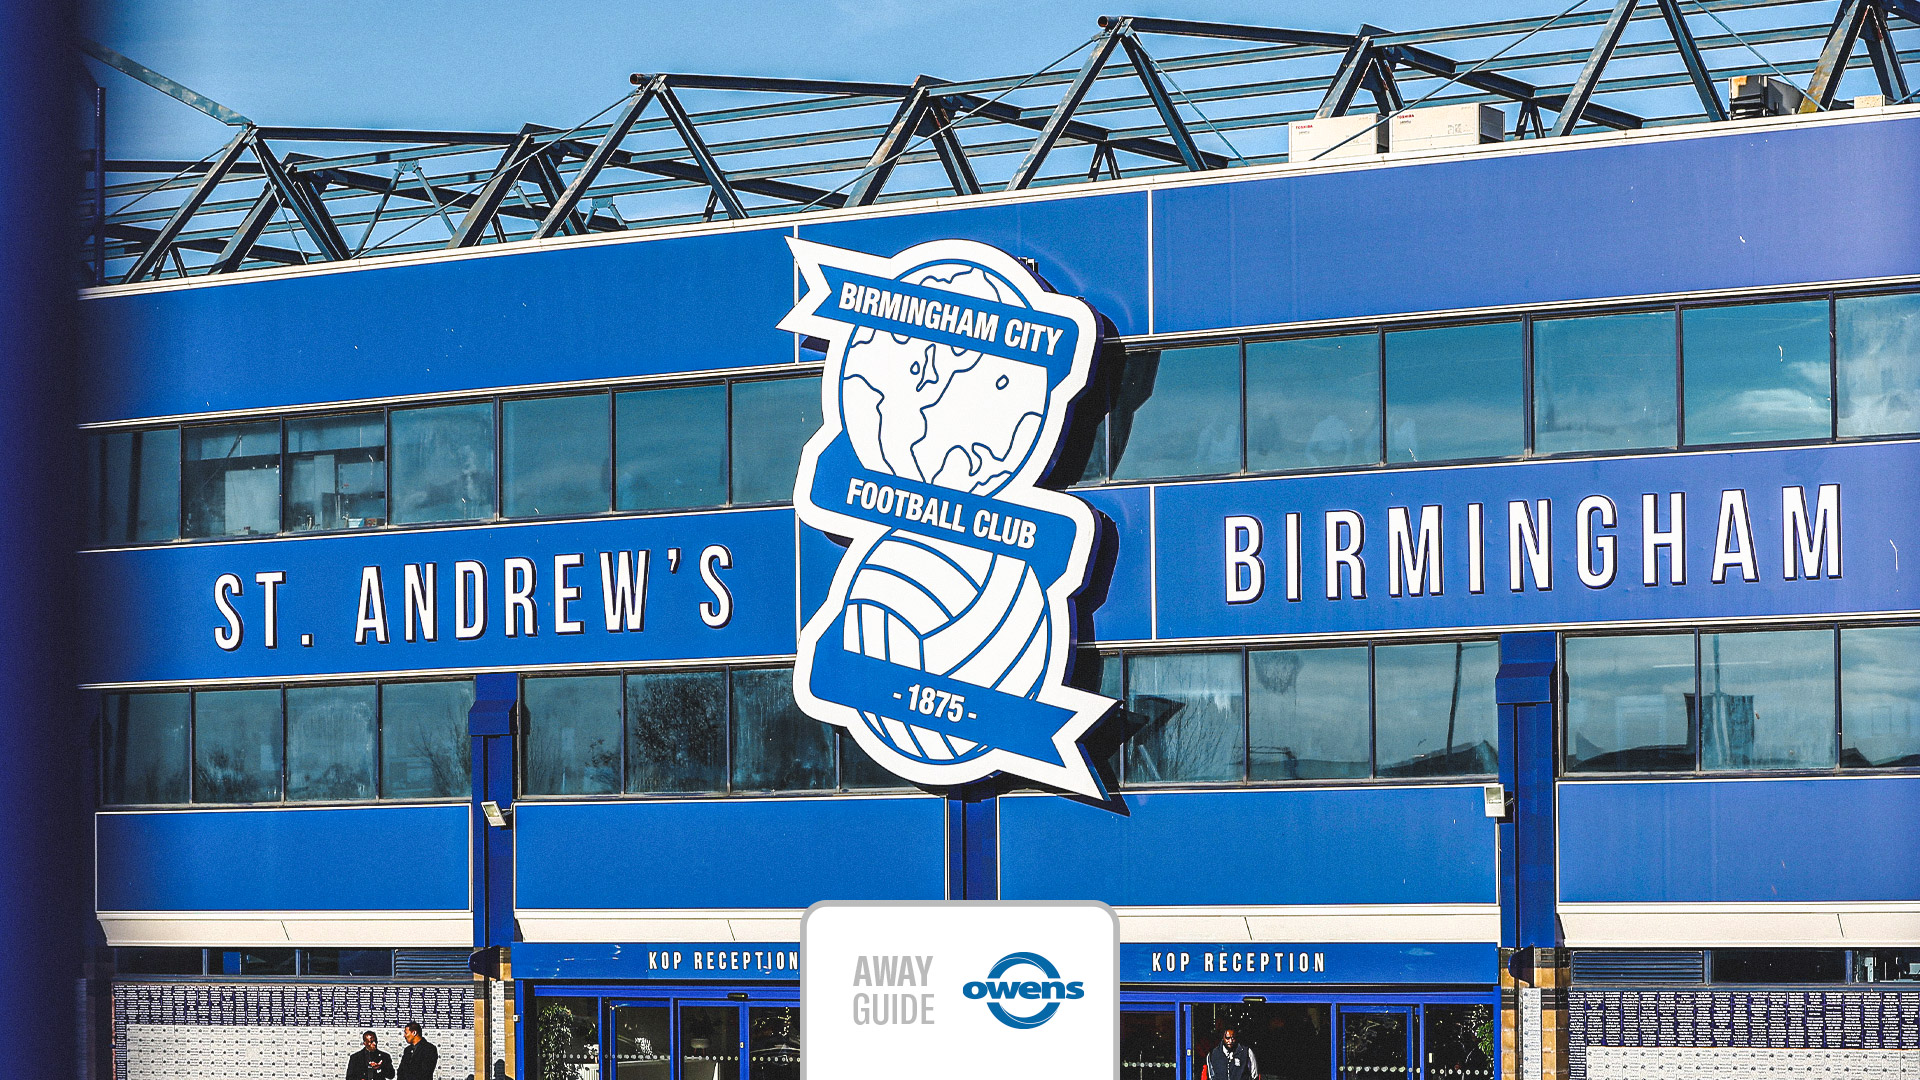 Away guide to Birmingham City sponsored by Owens